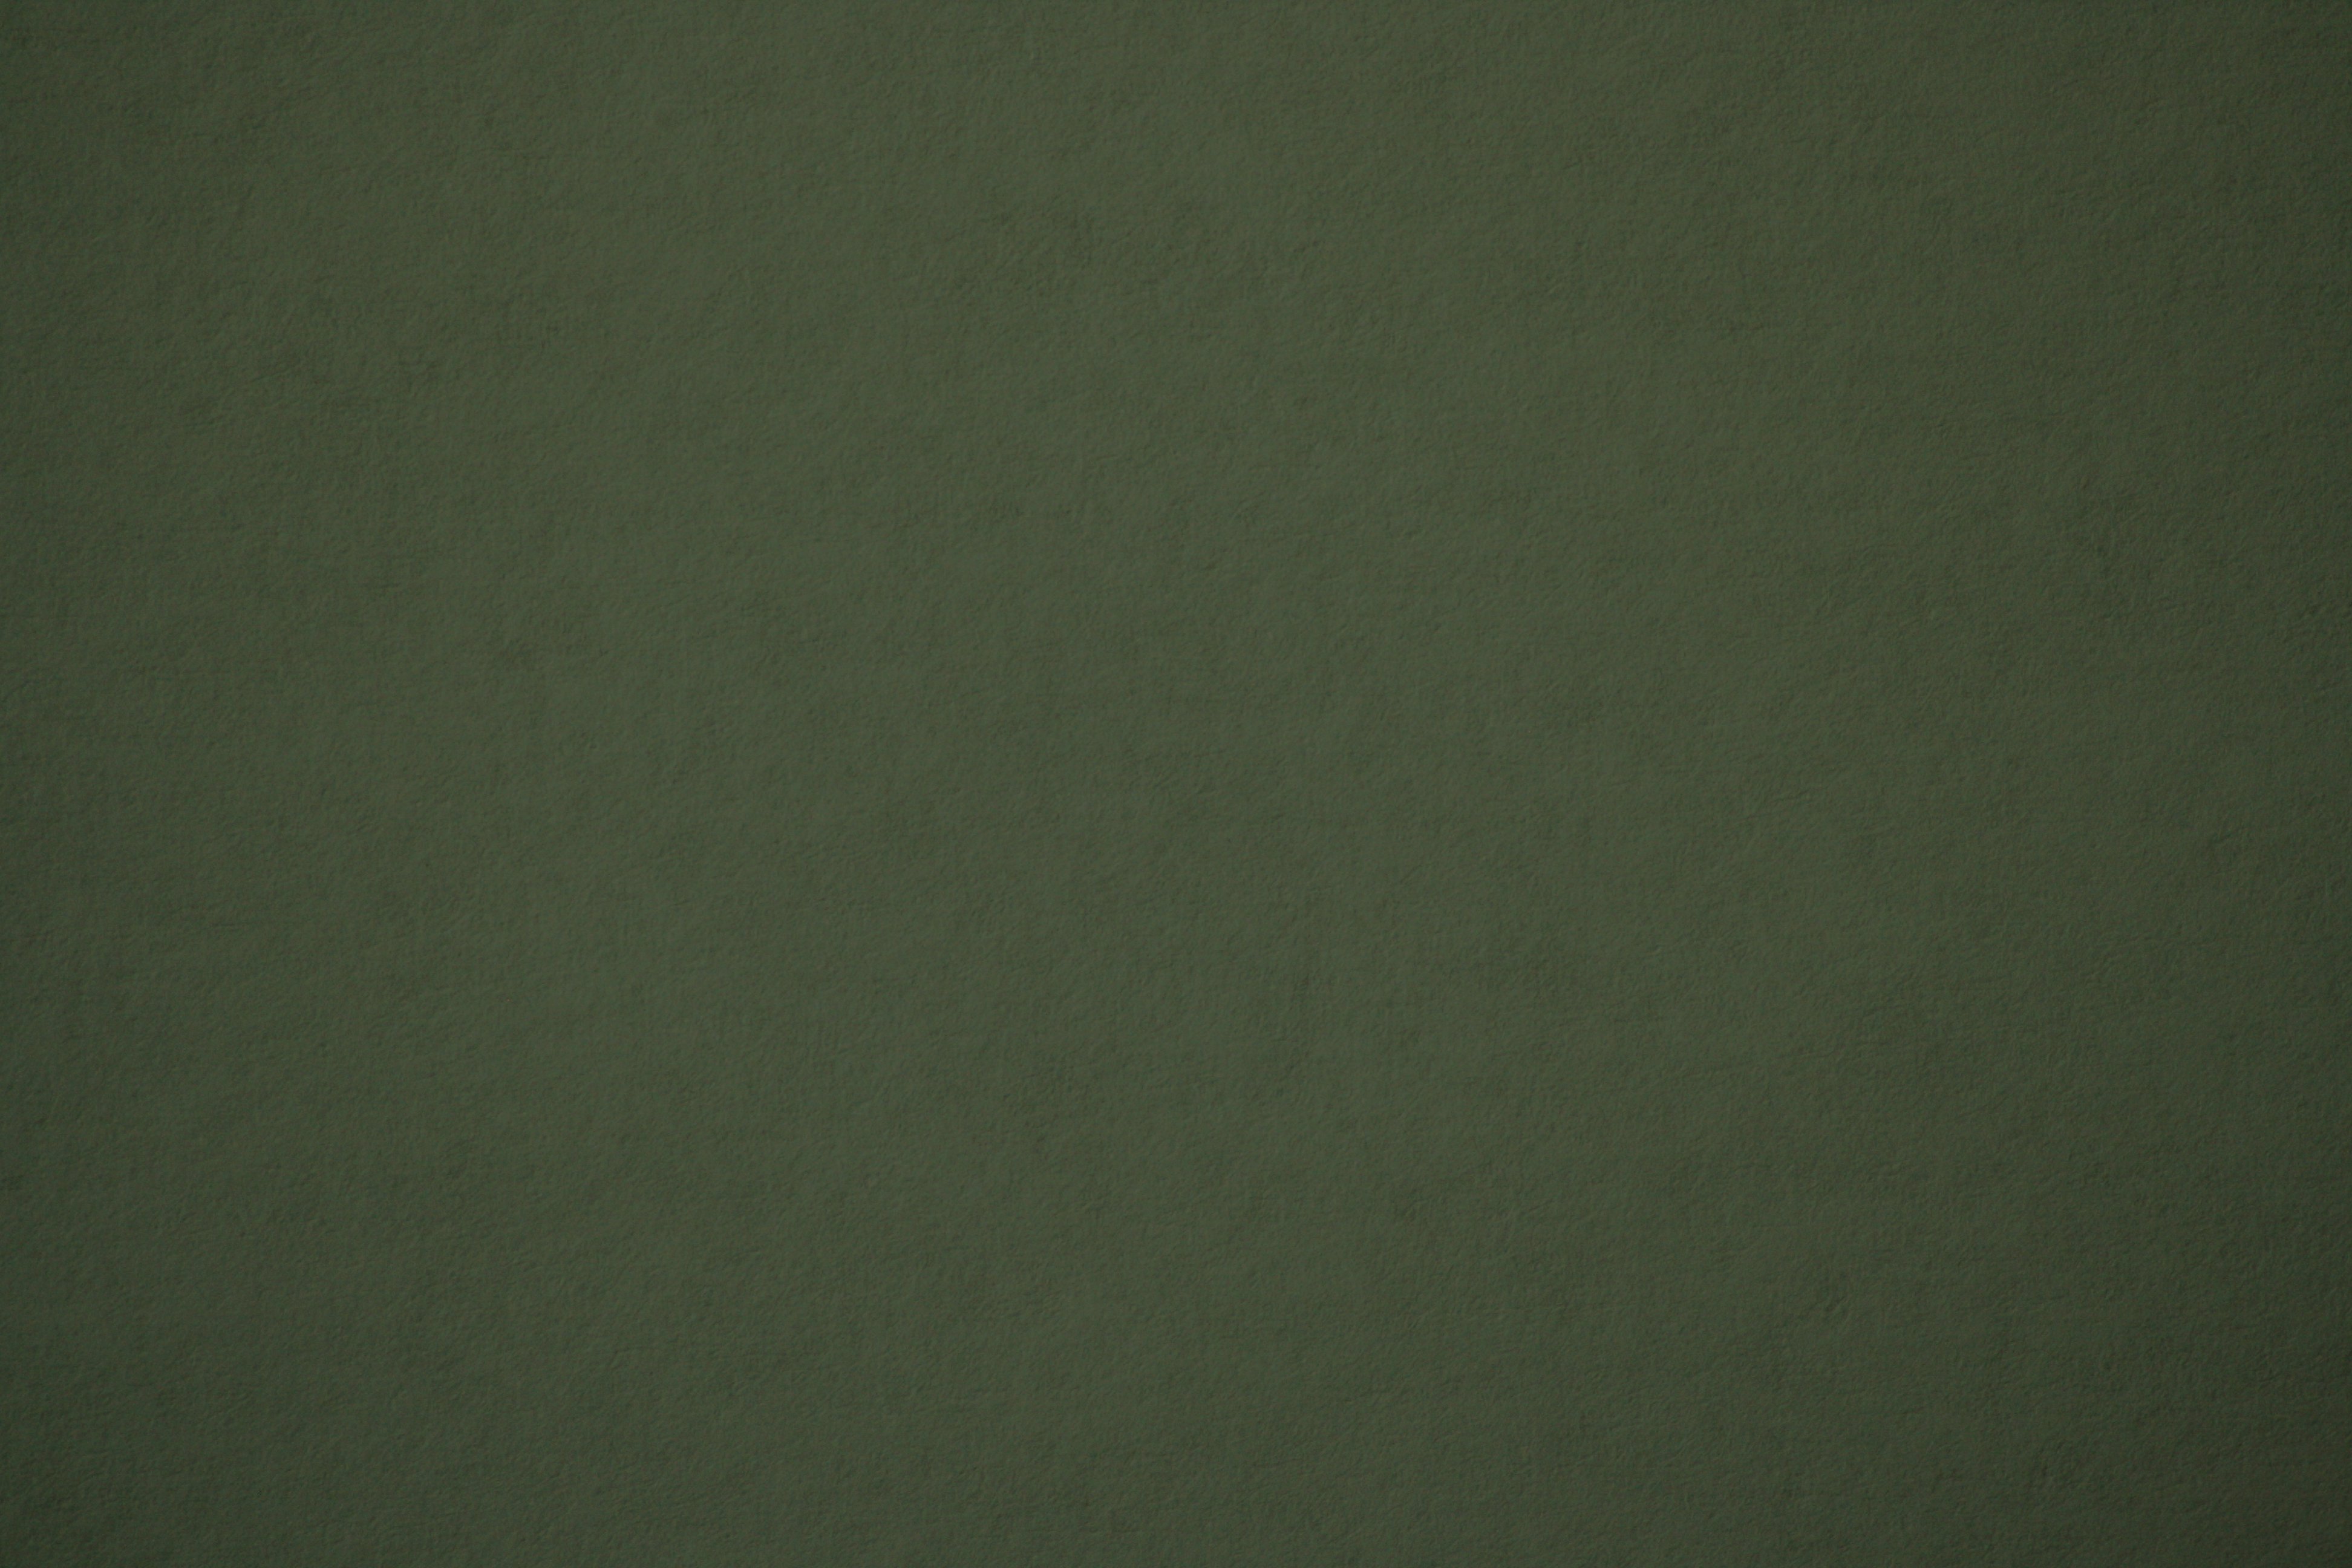 Olive Green Paper Texture Picture | Free Photograph | Photos Public ...